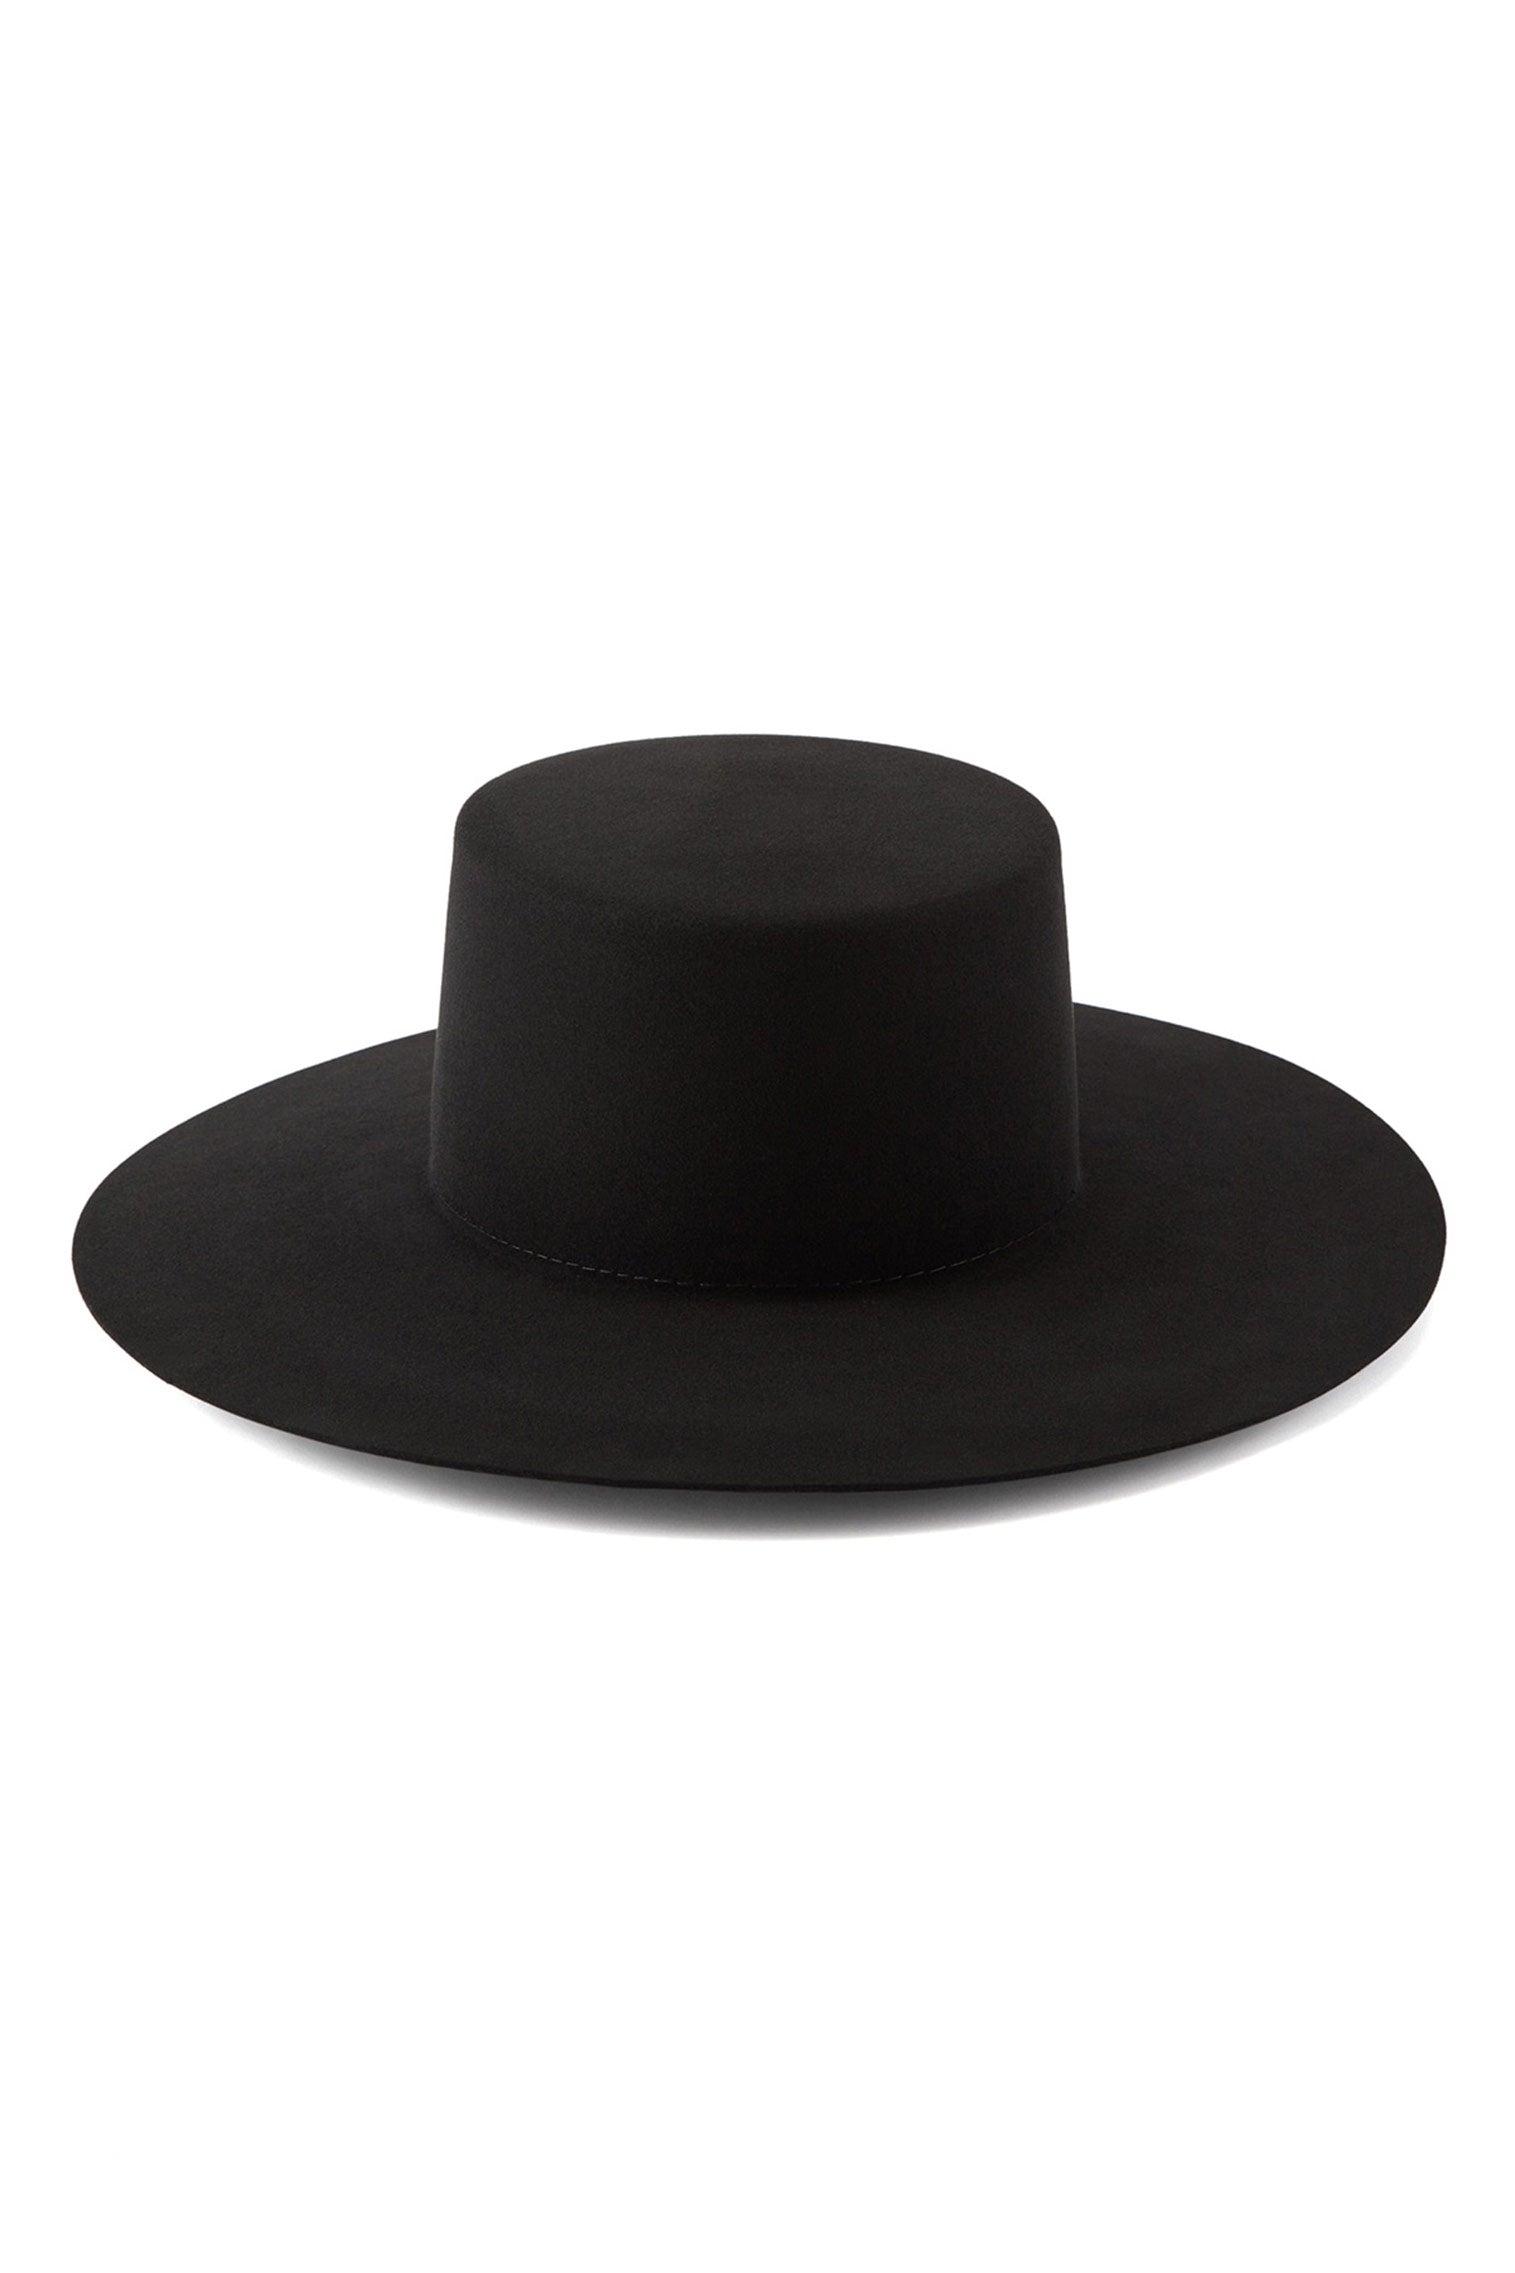 The Vicenzo -  - Lock & Co. Hatters London UK